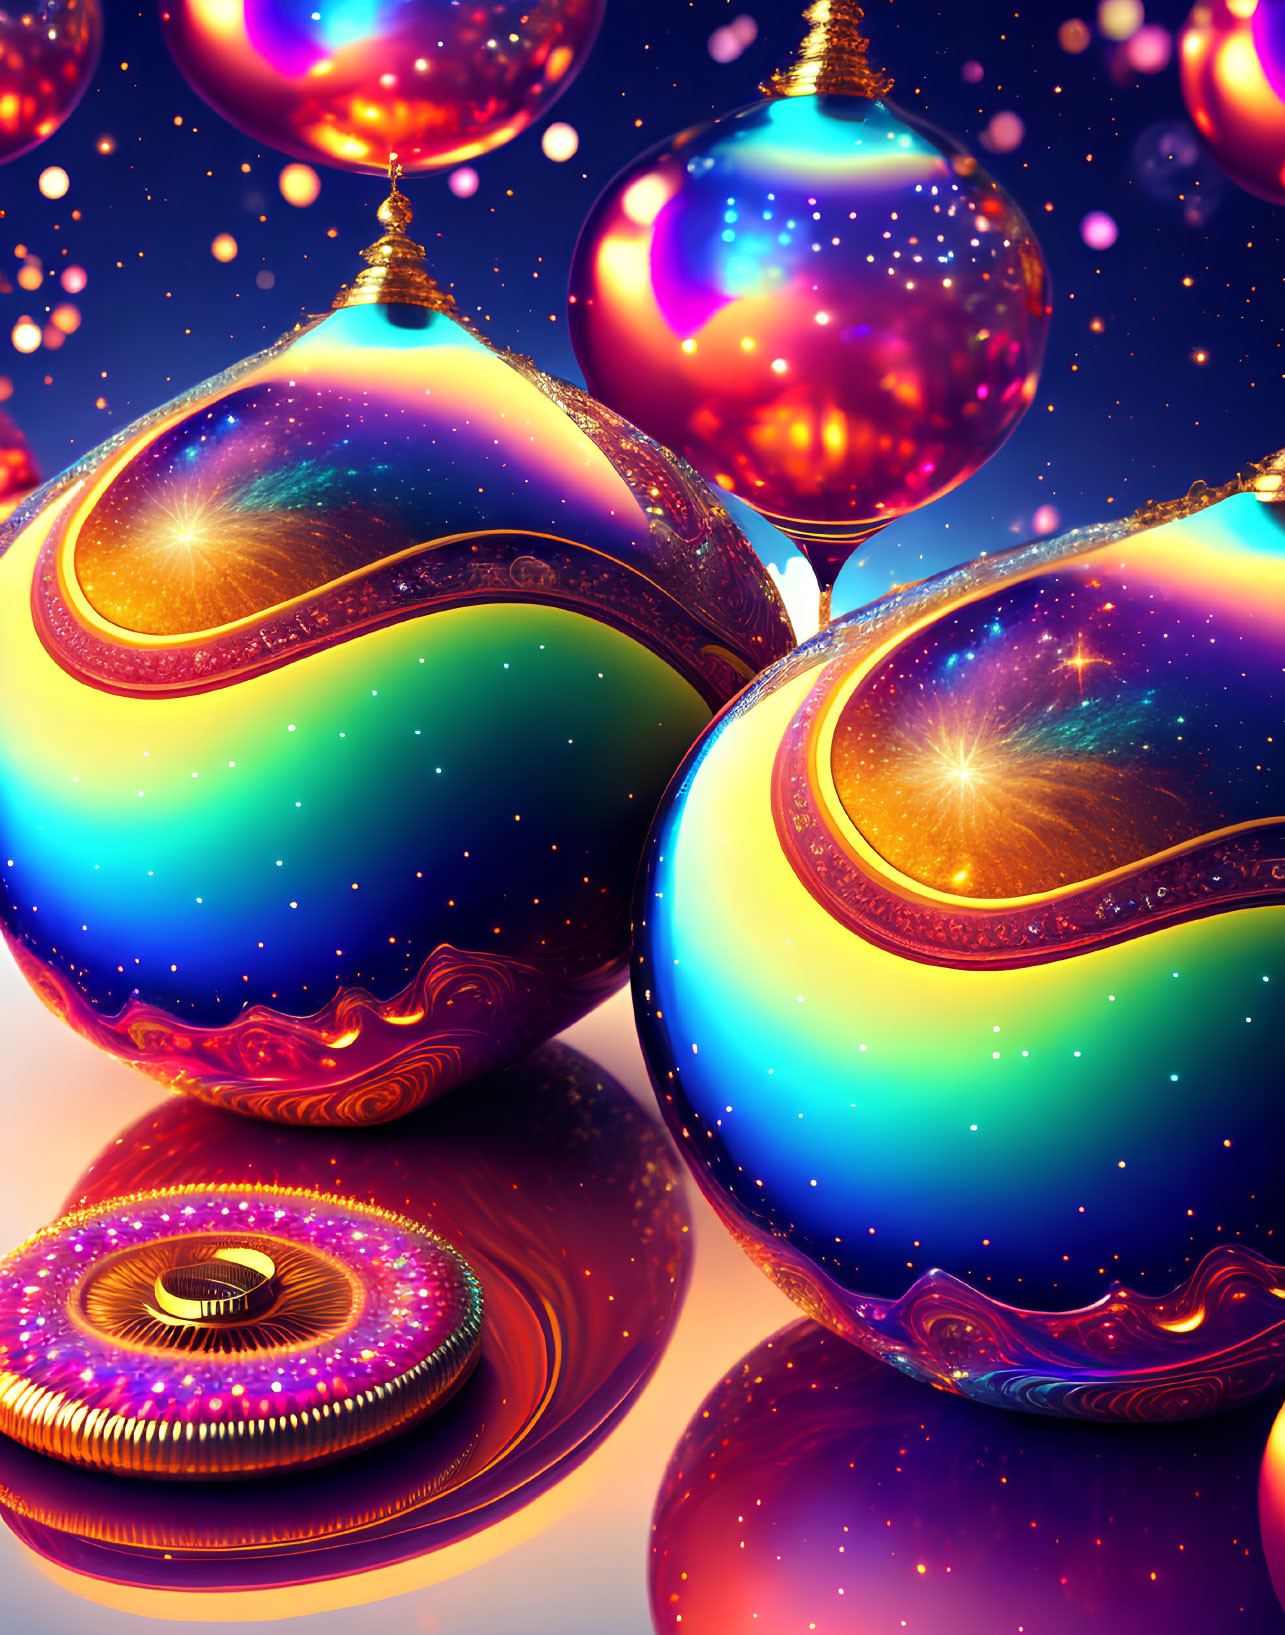 Colorful Cosmic Baubles and Ornaments with Glowing Stars and Intricate Patterns on Starry